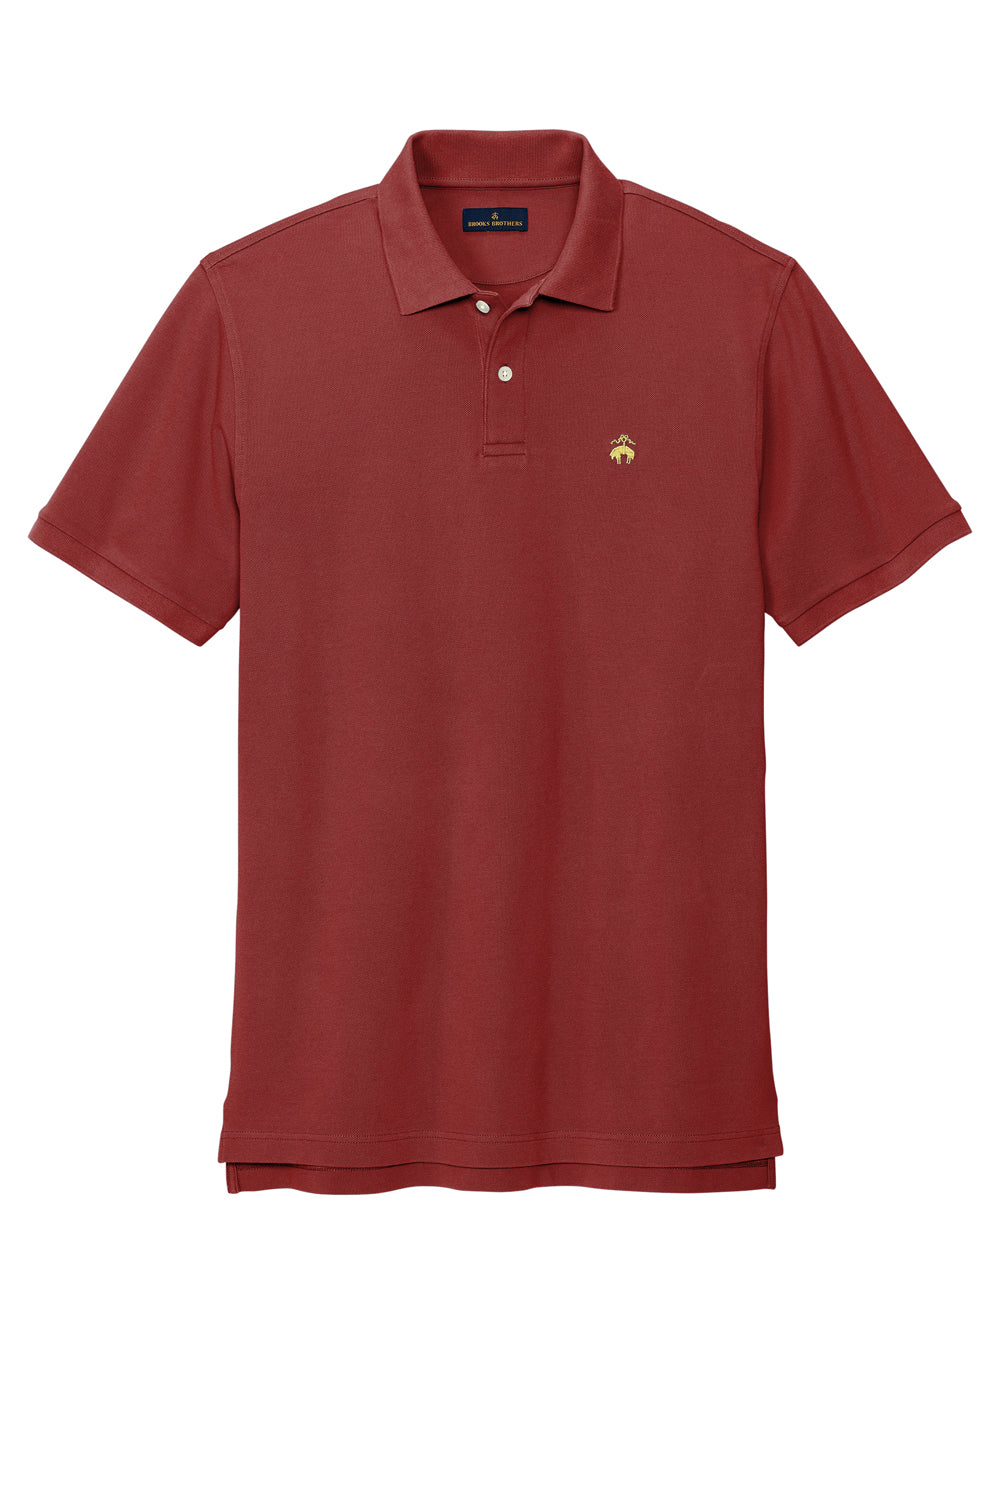 Brooks Brothers Mens Pique Short Sleeve Polo Shirt Rich Red Flat Front